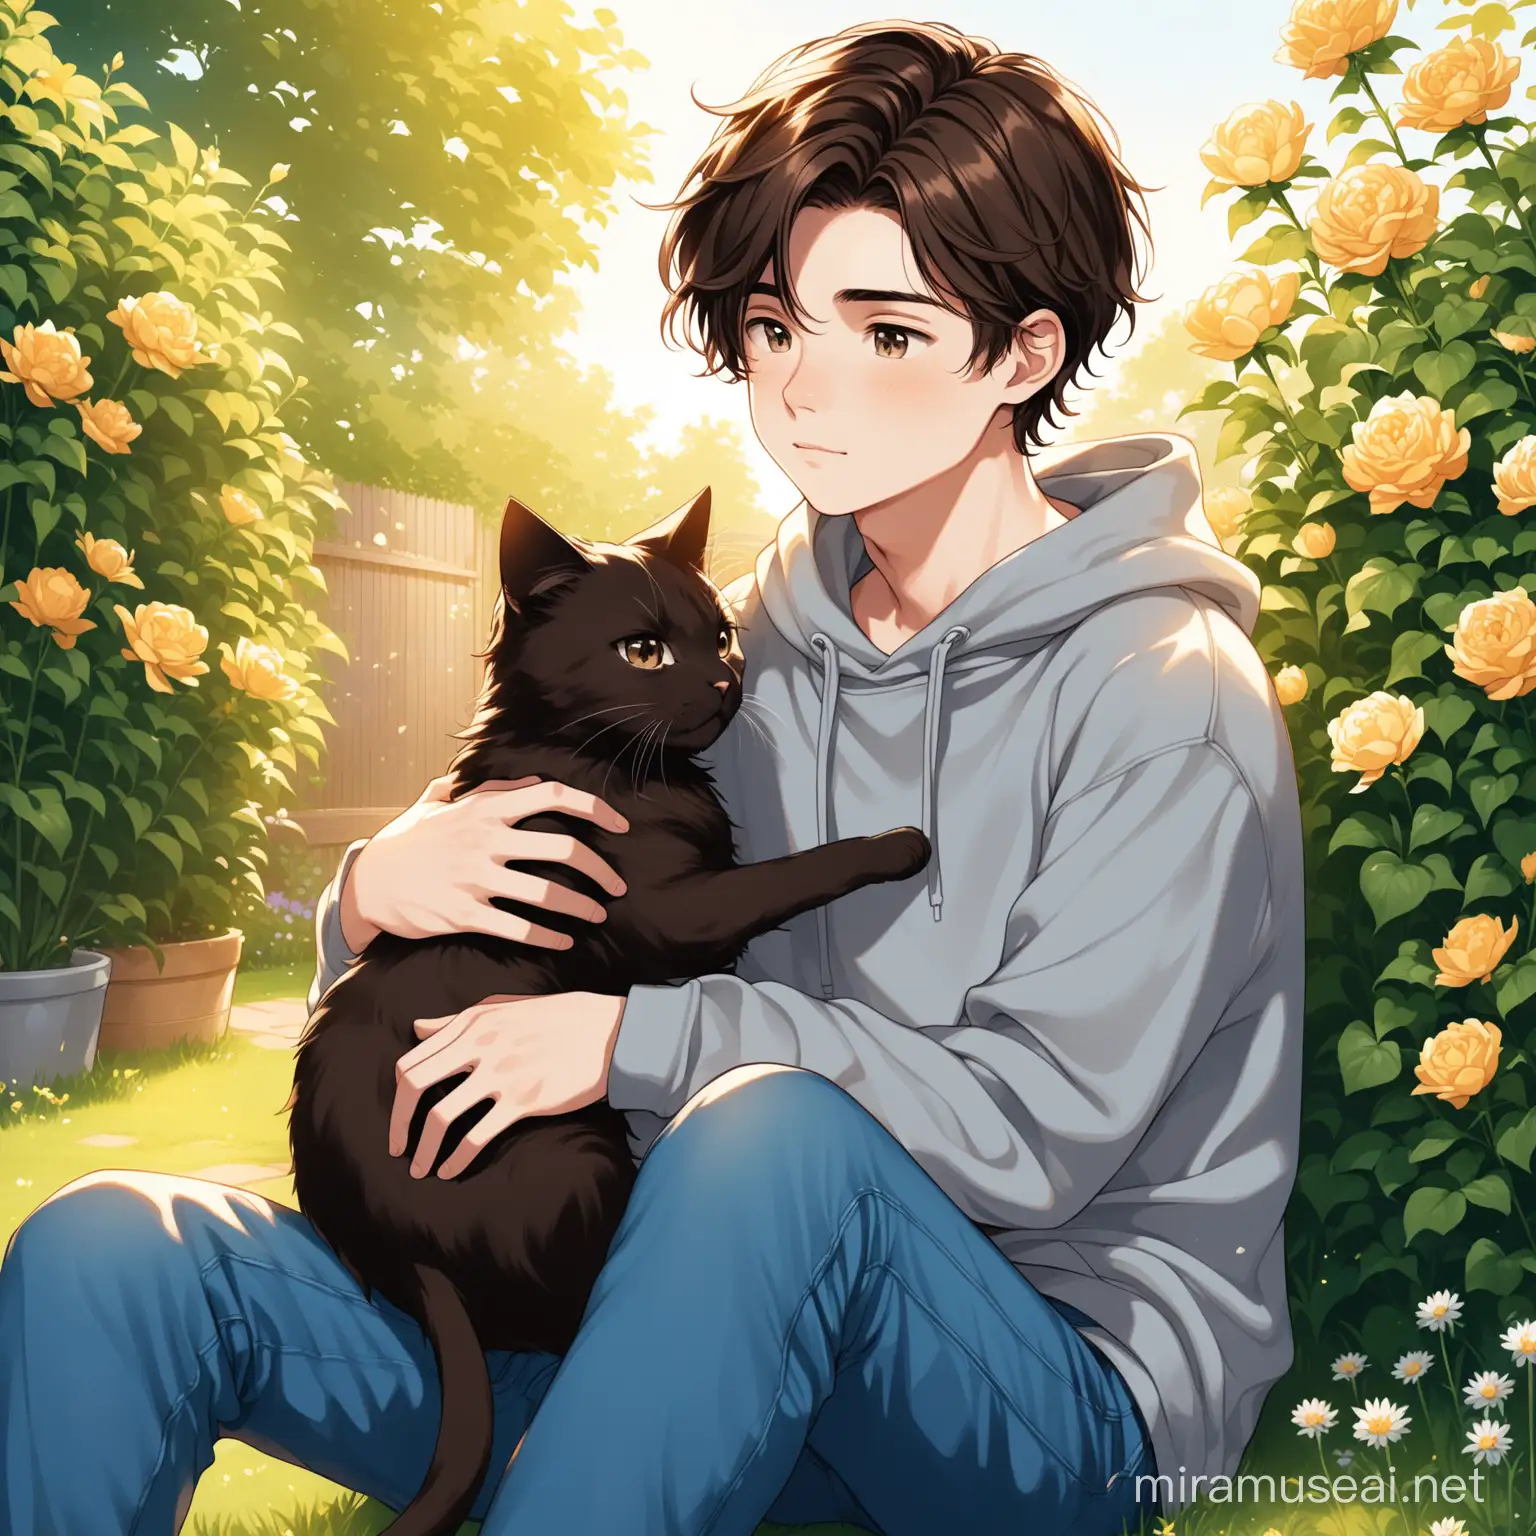 digital art image of an 18-year-old English boy, he has dark brown hair, wearing grey sweatshirt, blue jeans, sitting down in garden, cuddling with a cat, in the afternoon